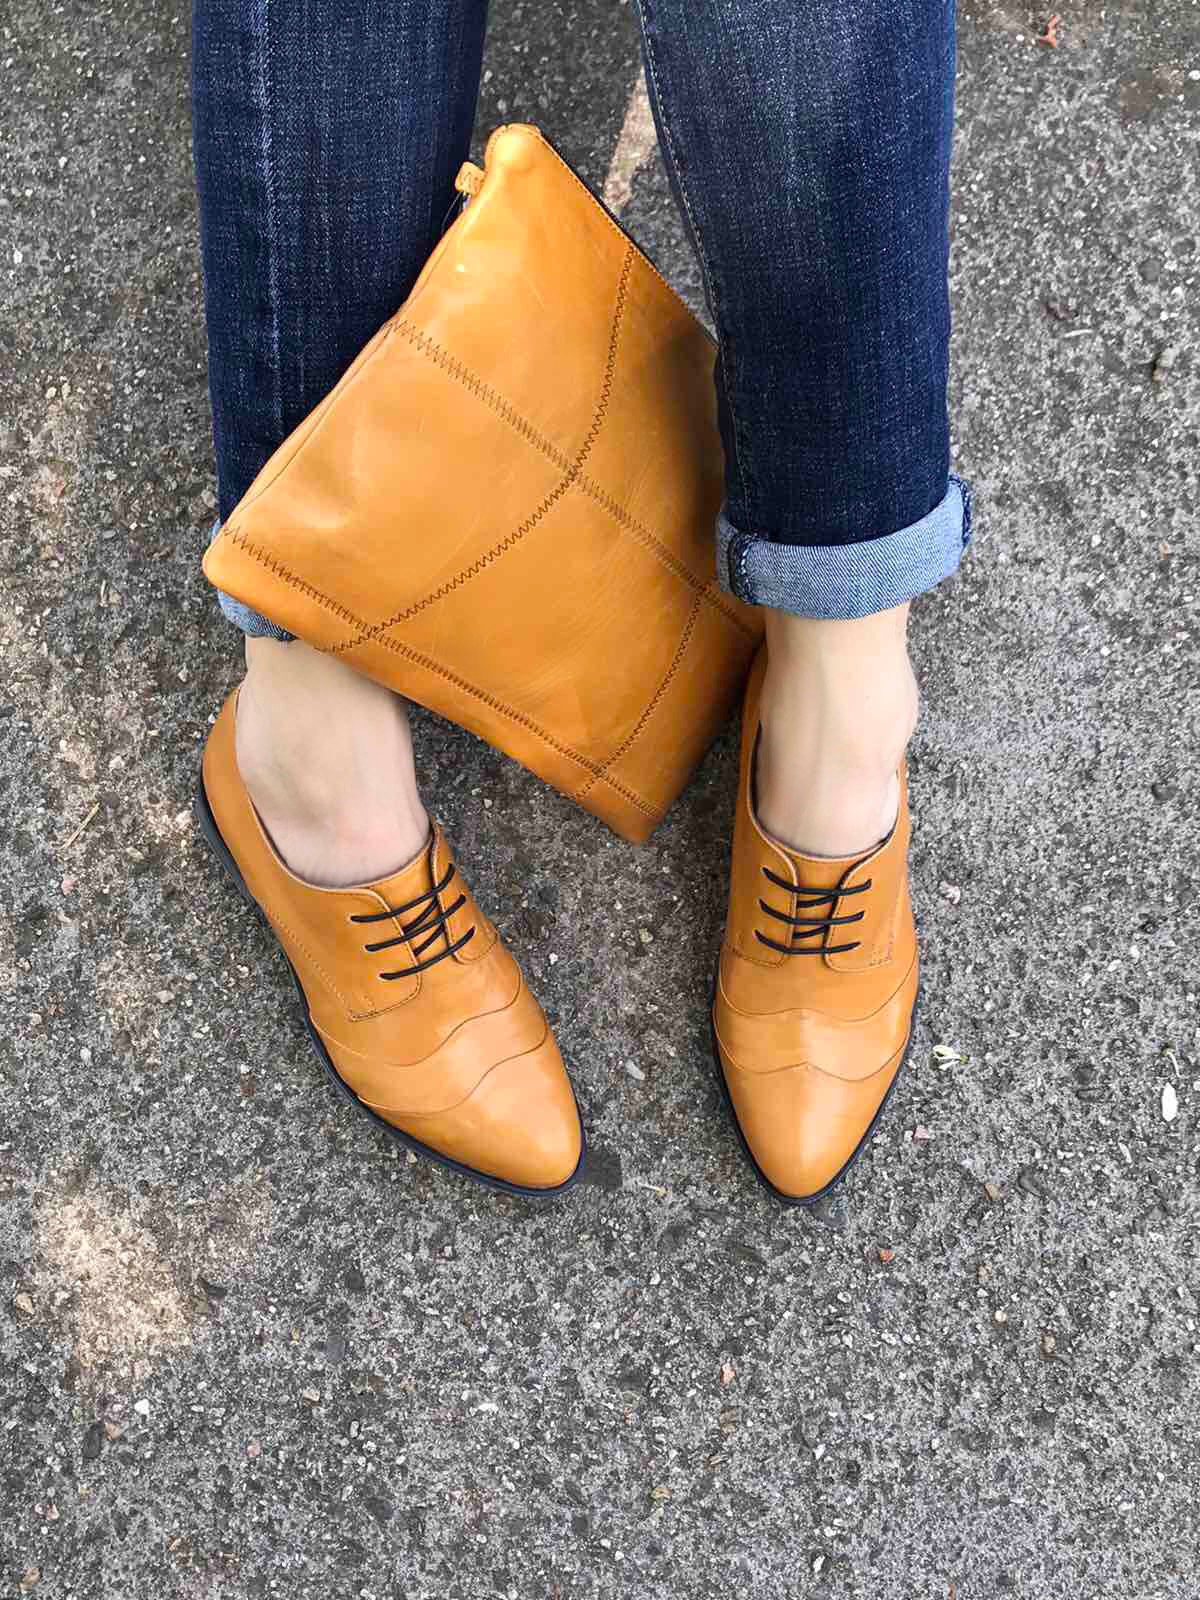 Leather Oxford Shoes Cognac Leather Oxford Shoes Tan Leather - Etsy